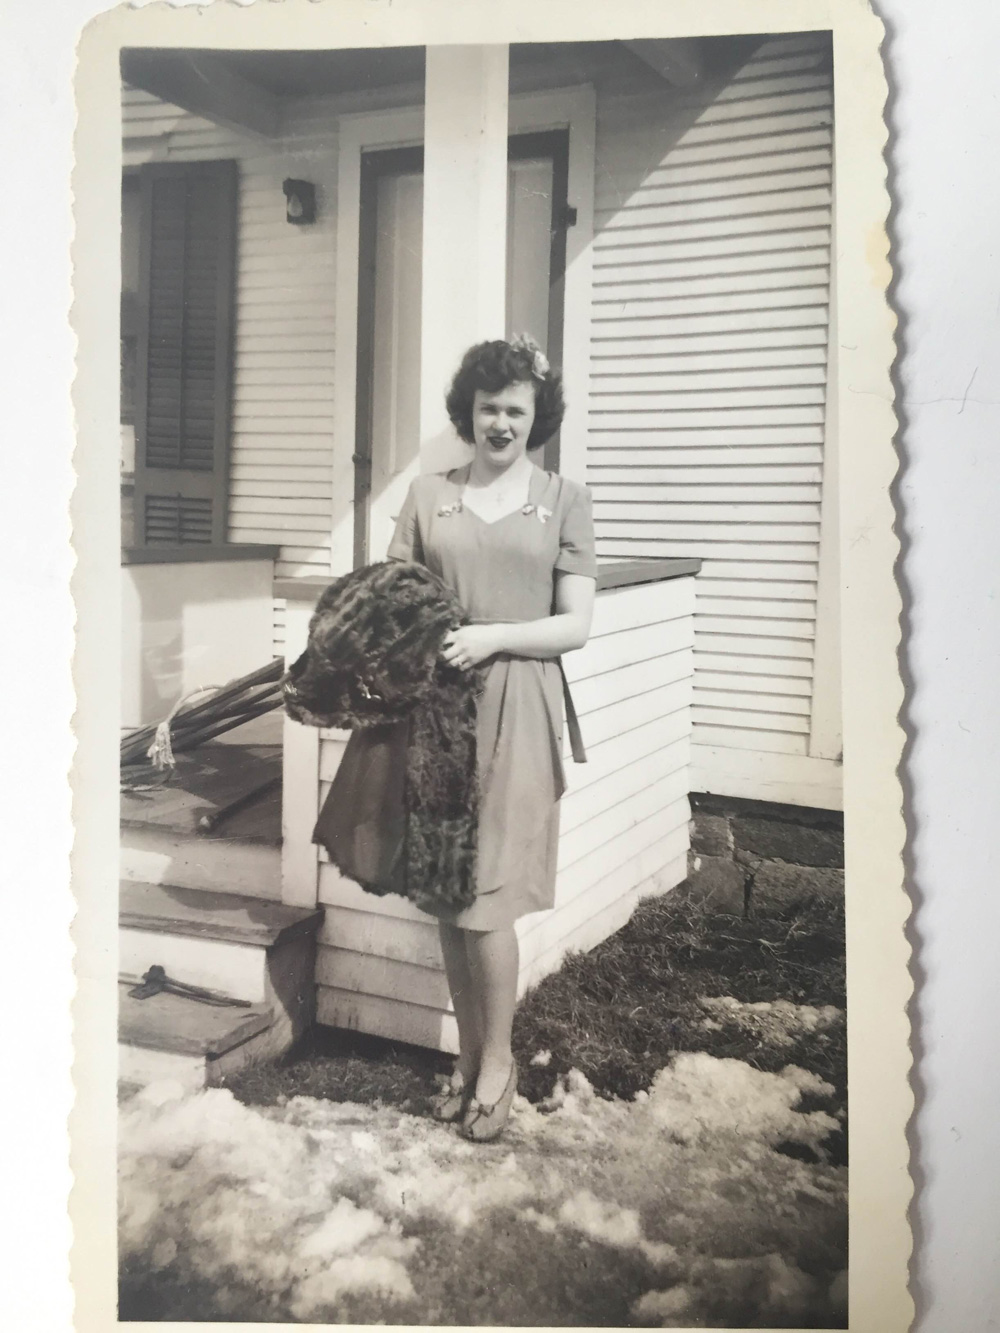 My grandma in the mid-'40s